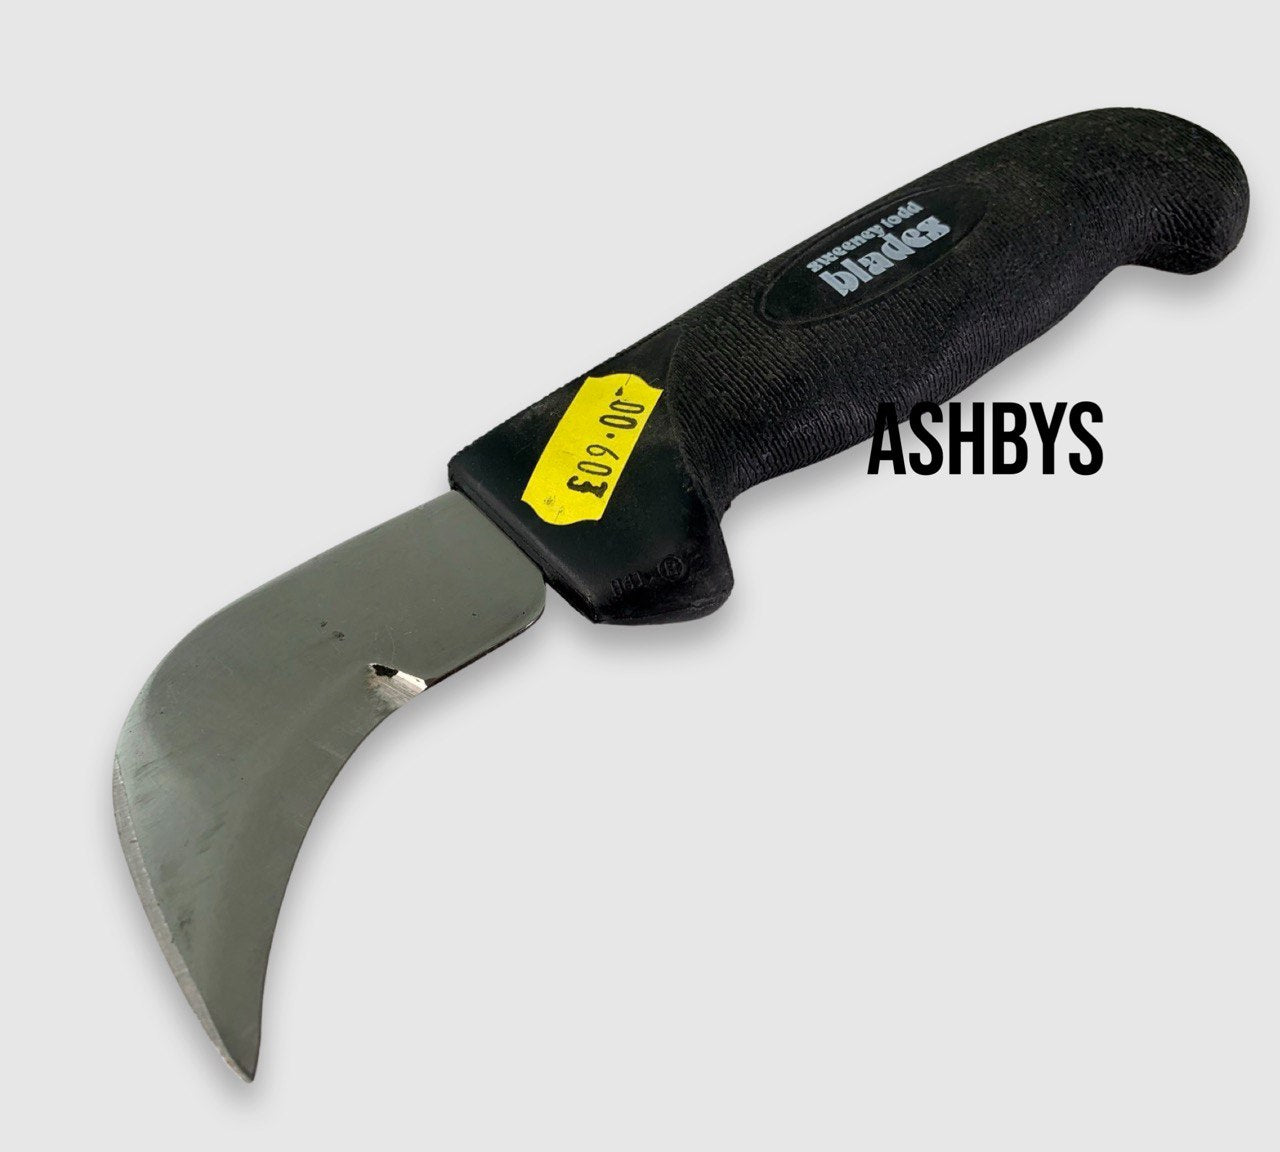 Sweeney Todd Blades Rubber Handle Lino Knife 30366